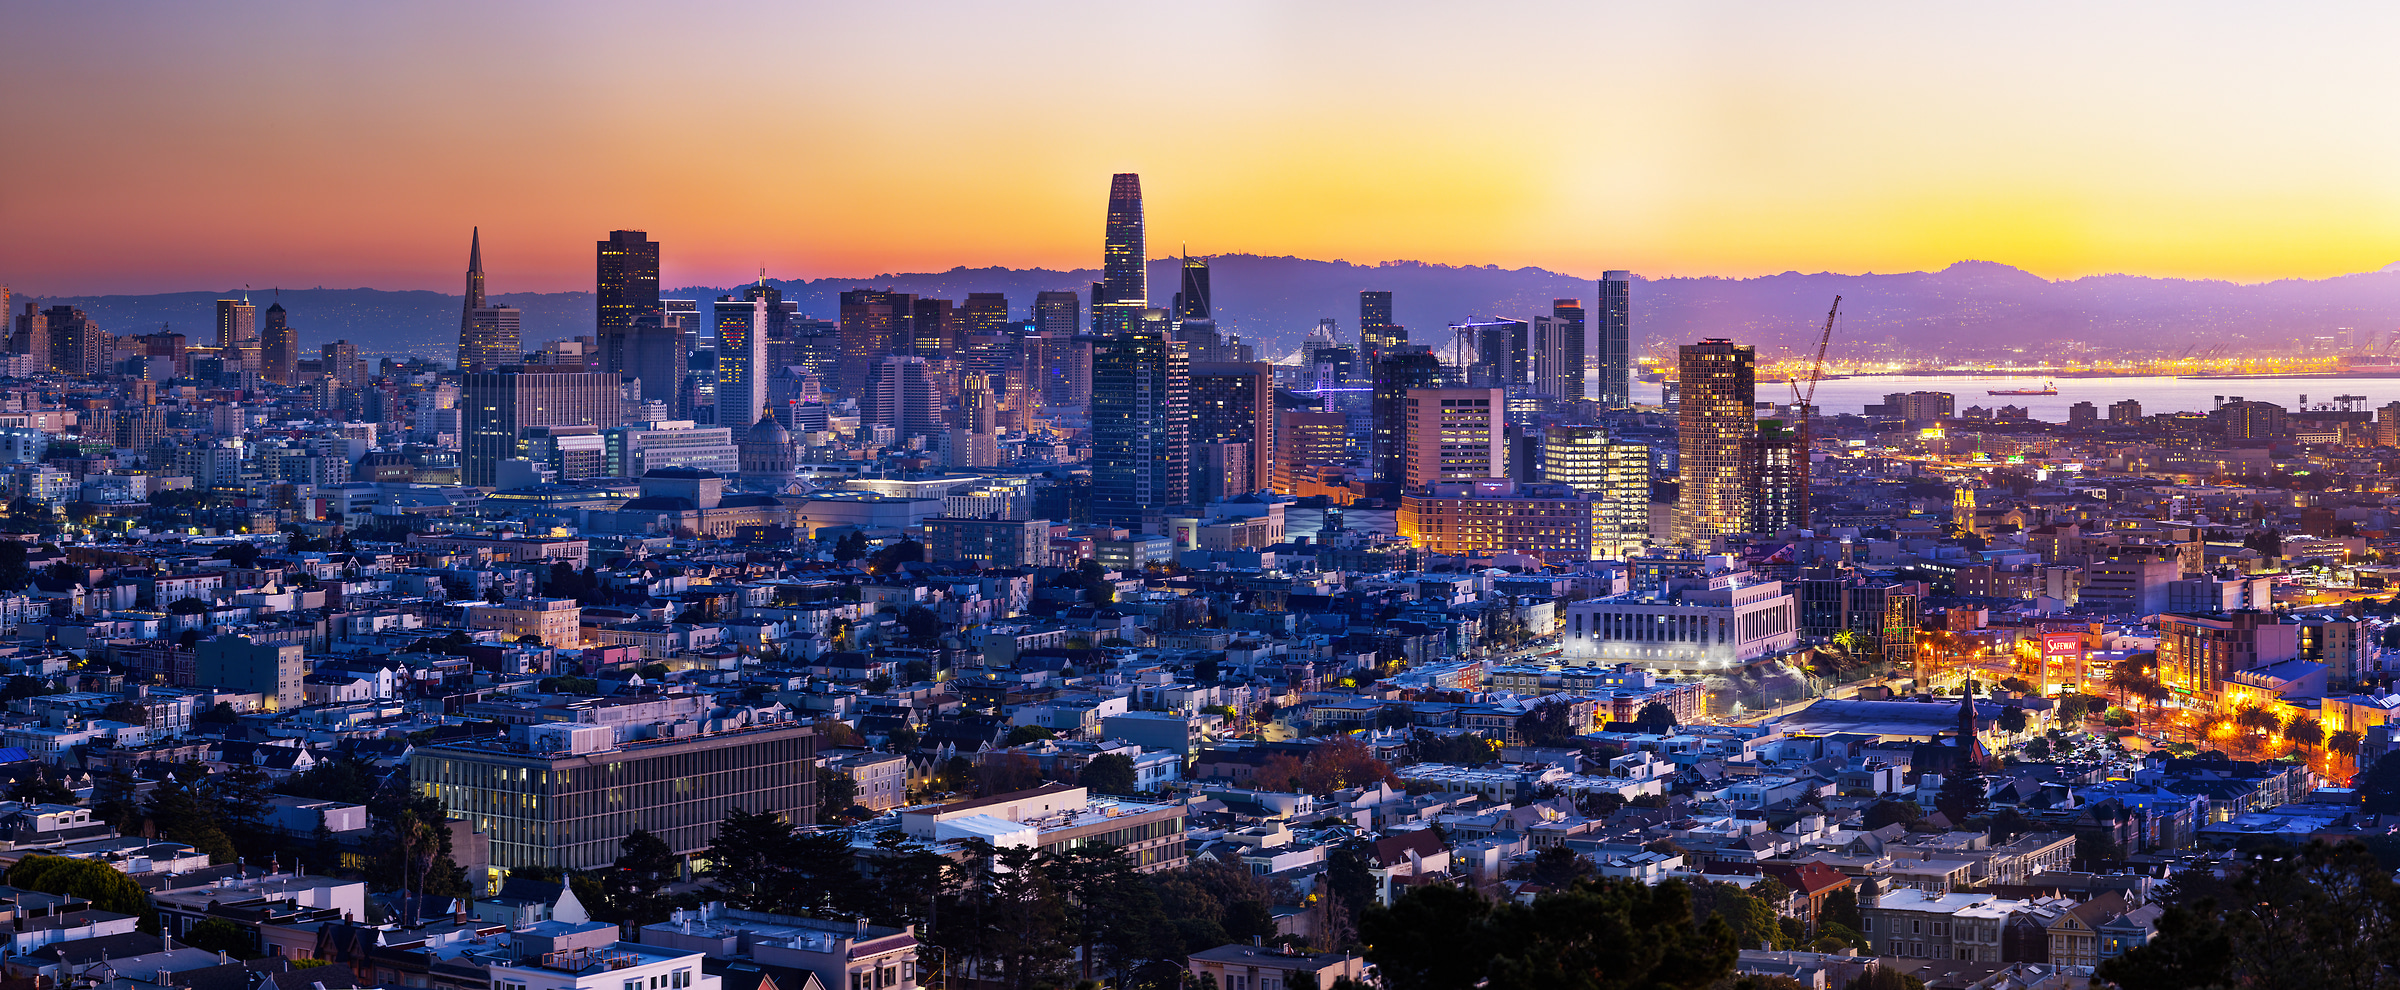 359 megapixels! A very high resolution, large-format VAST photo print of San Francisco at sunrise; skyline photograph created by Nicholas Gonzales in Tank Hill, San Francisco, California.